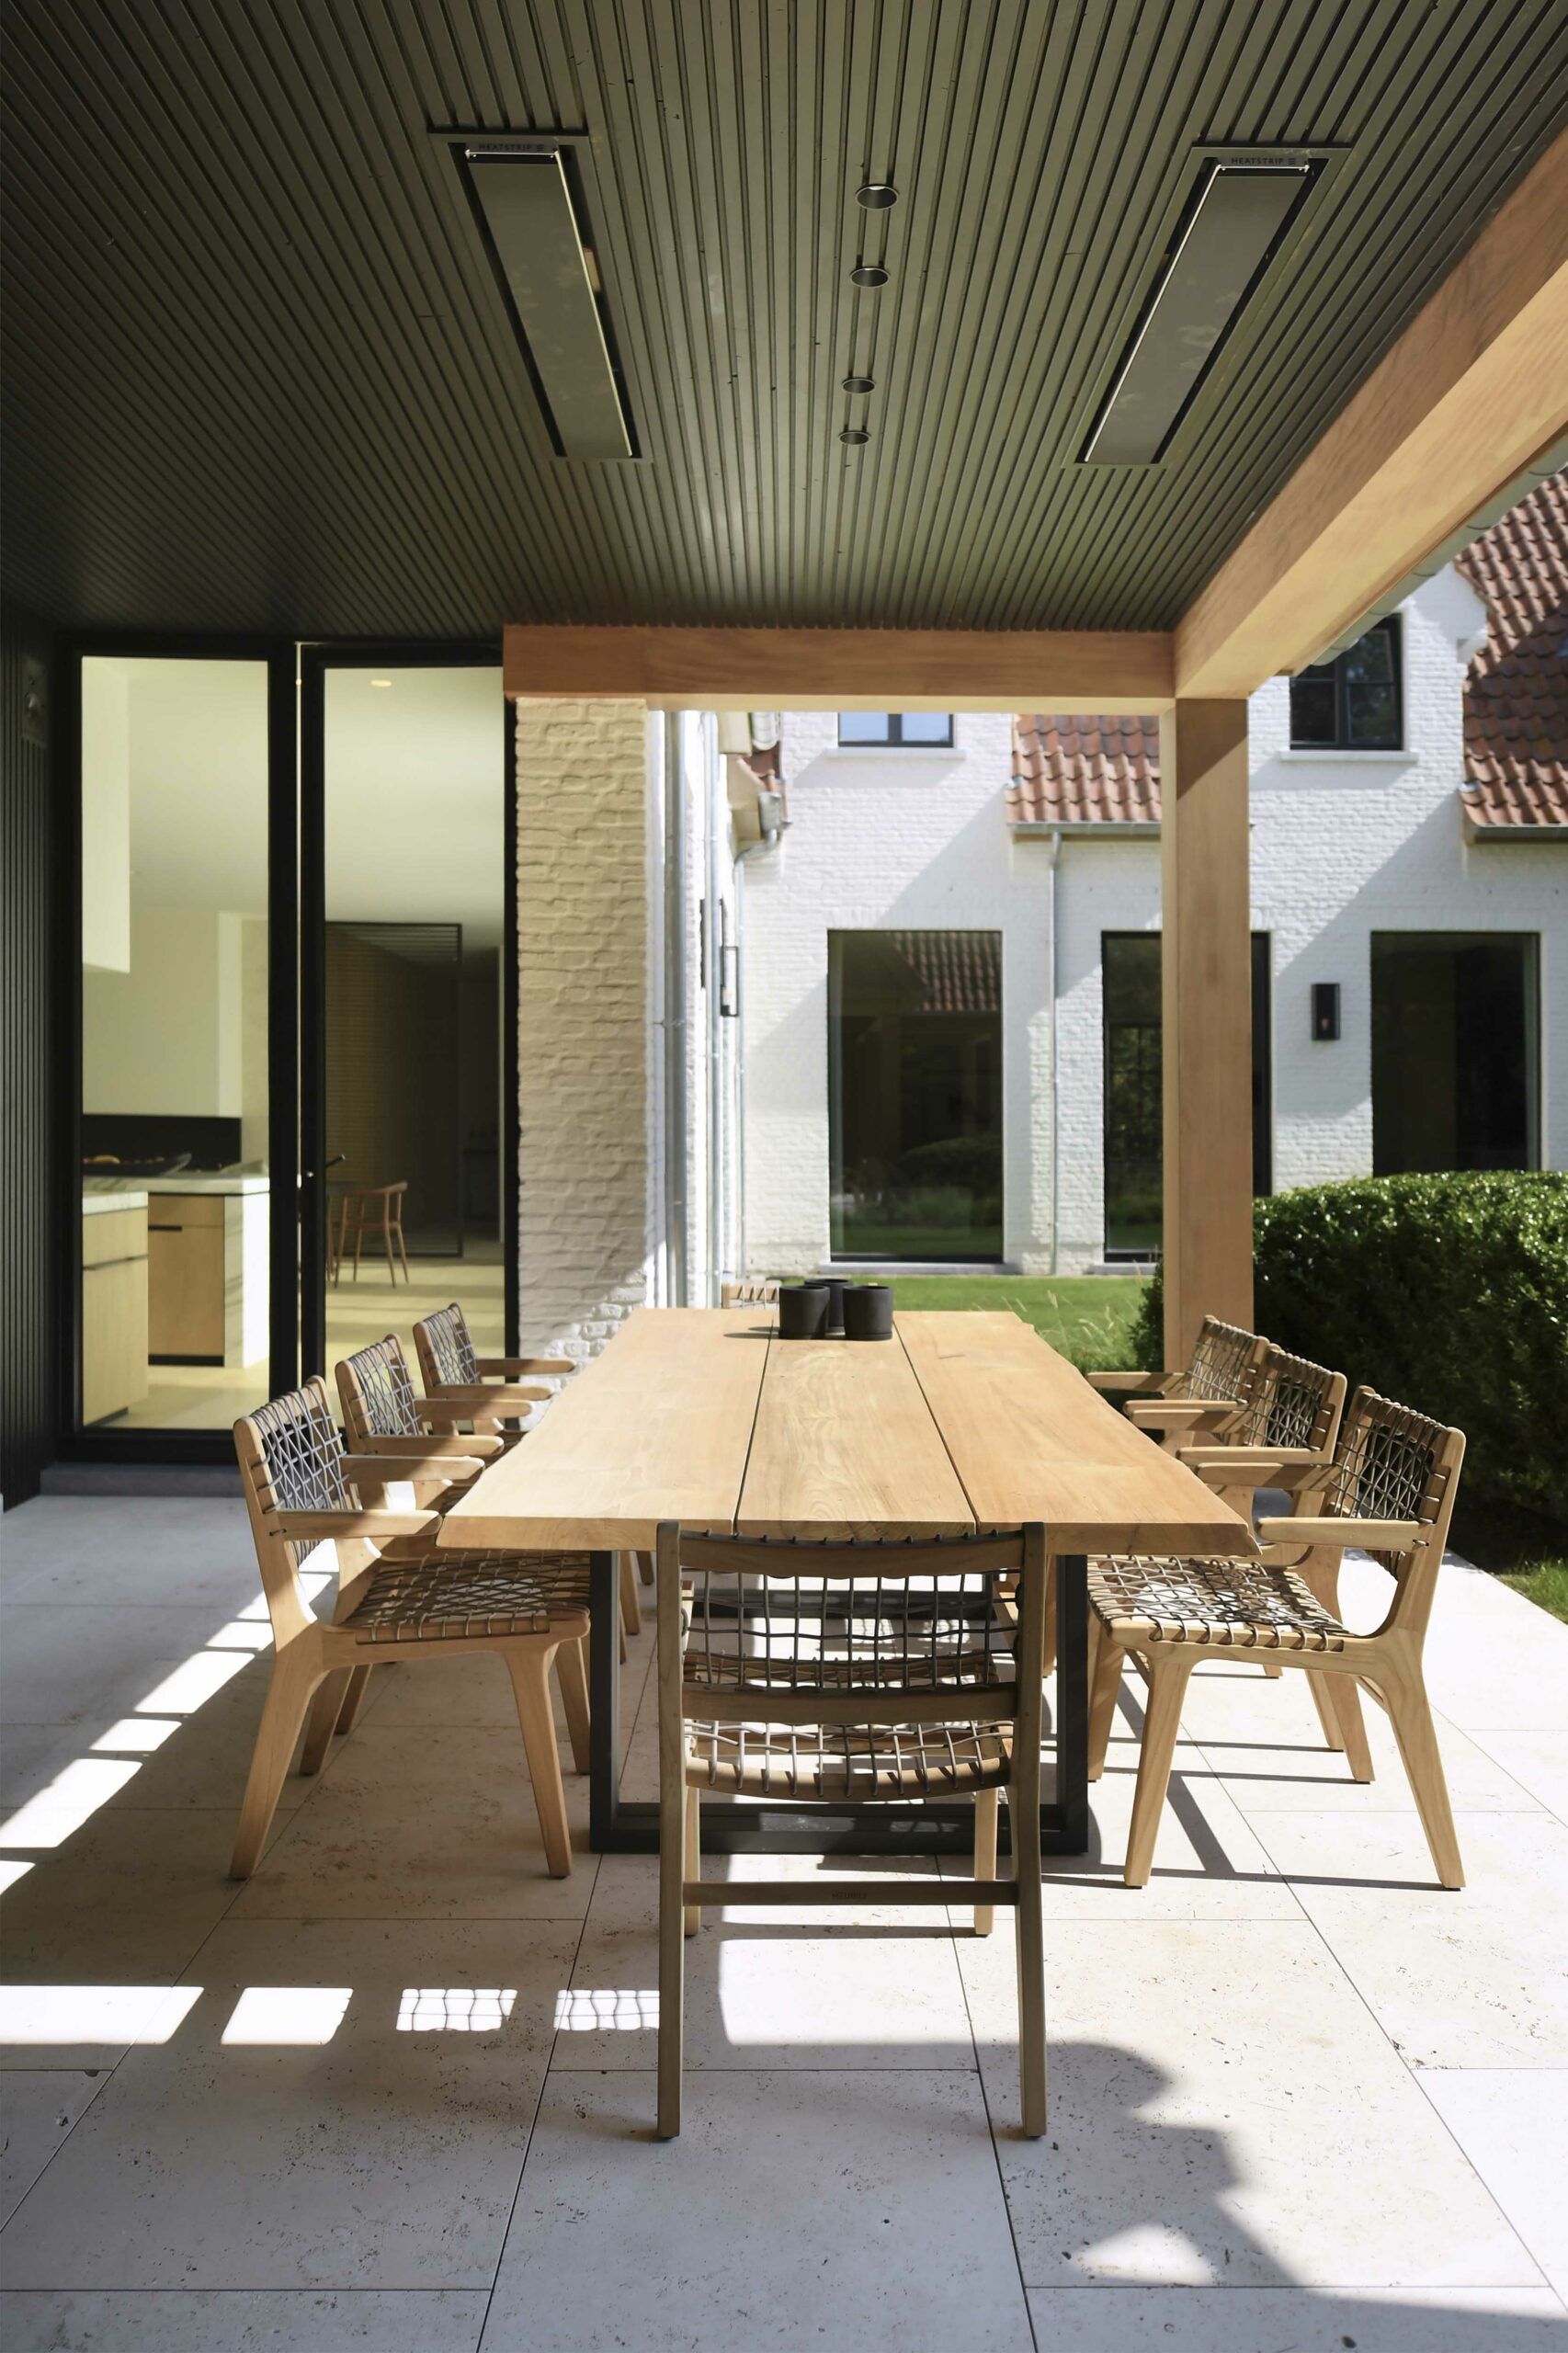 Outdoor dining area with wooden table and chairs.